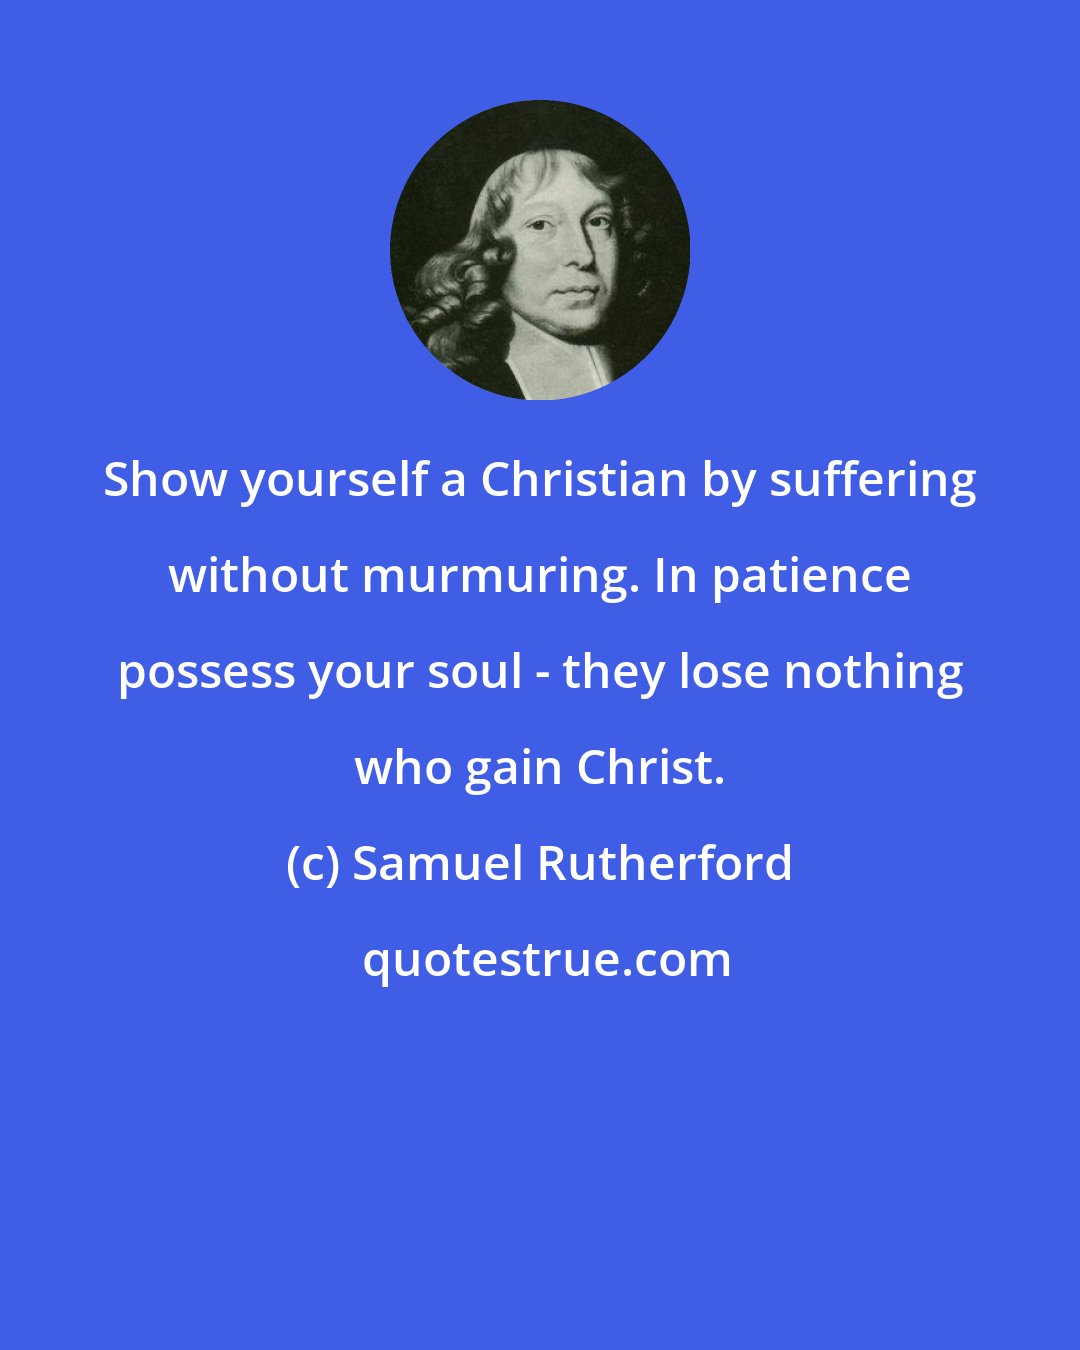 Samuel Rutherford: Show yourself a Christian by suffering without murmuring. In patience possess your soul - they lose nothing who gain Christ.